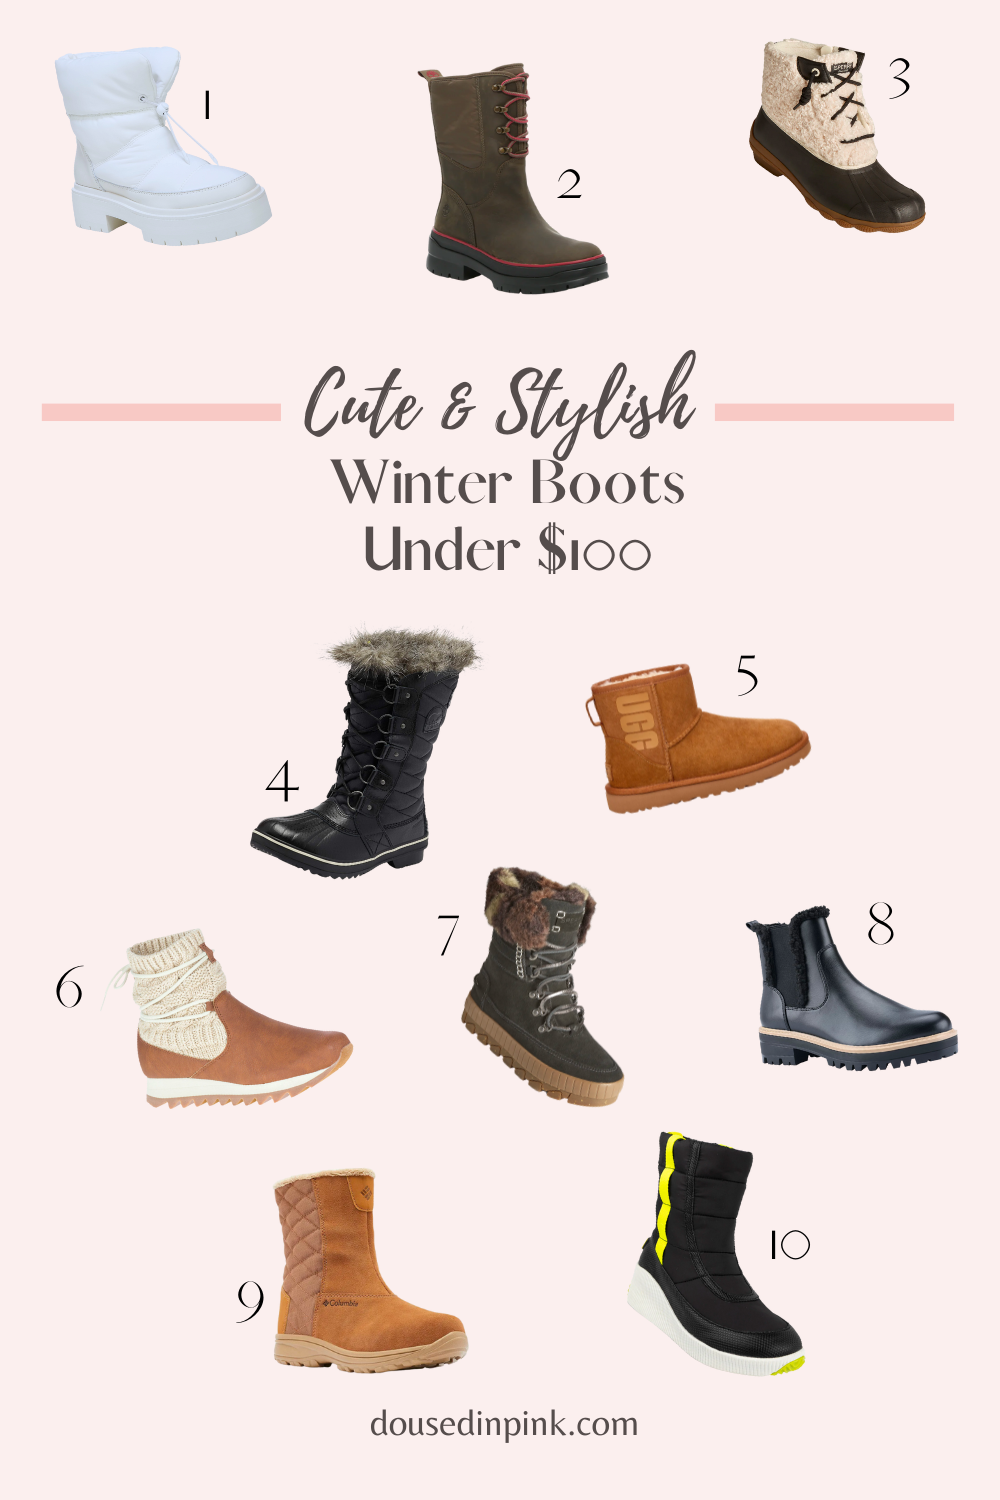 You Can't go to the Snow without Cute Snow Boots